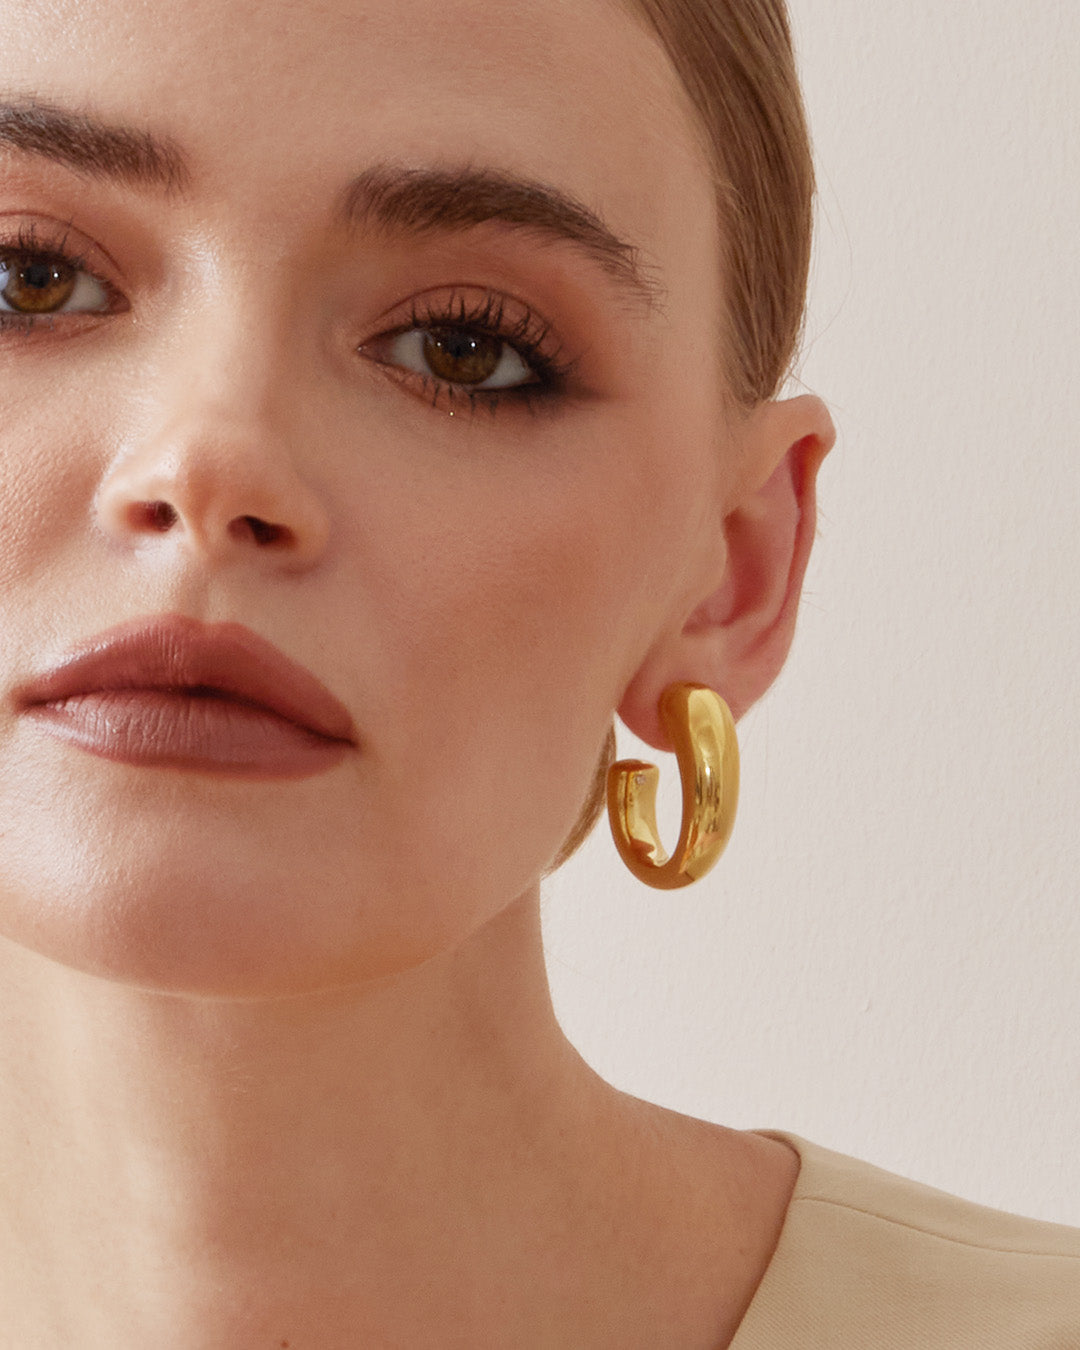 This is the product picture of chunky hoop earrings plated in gold in sterling silver material